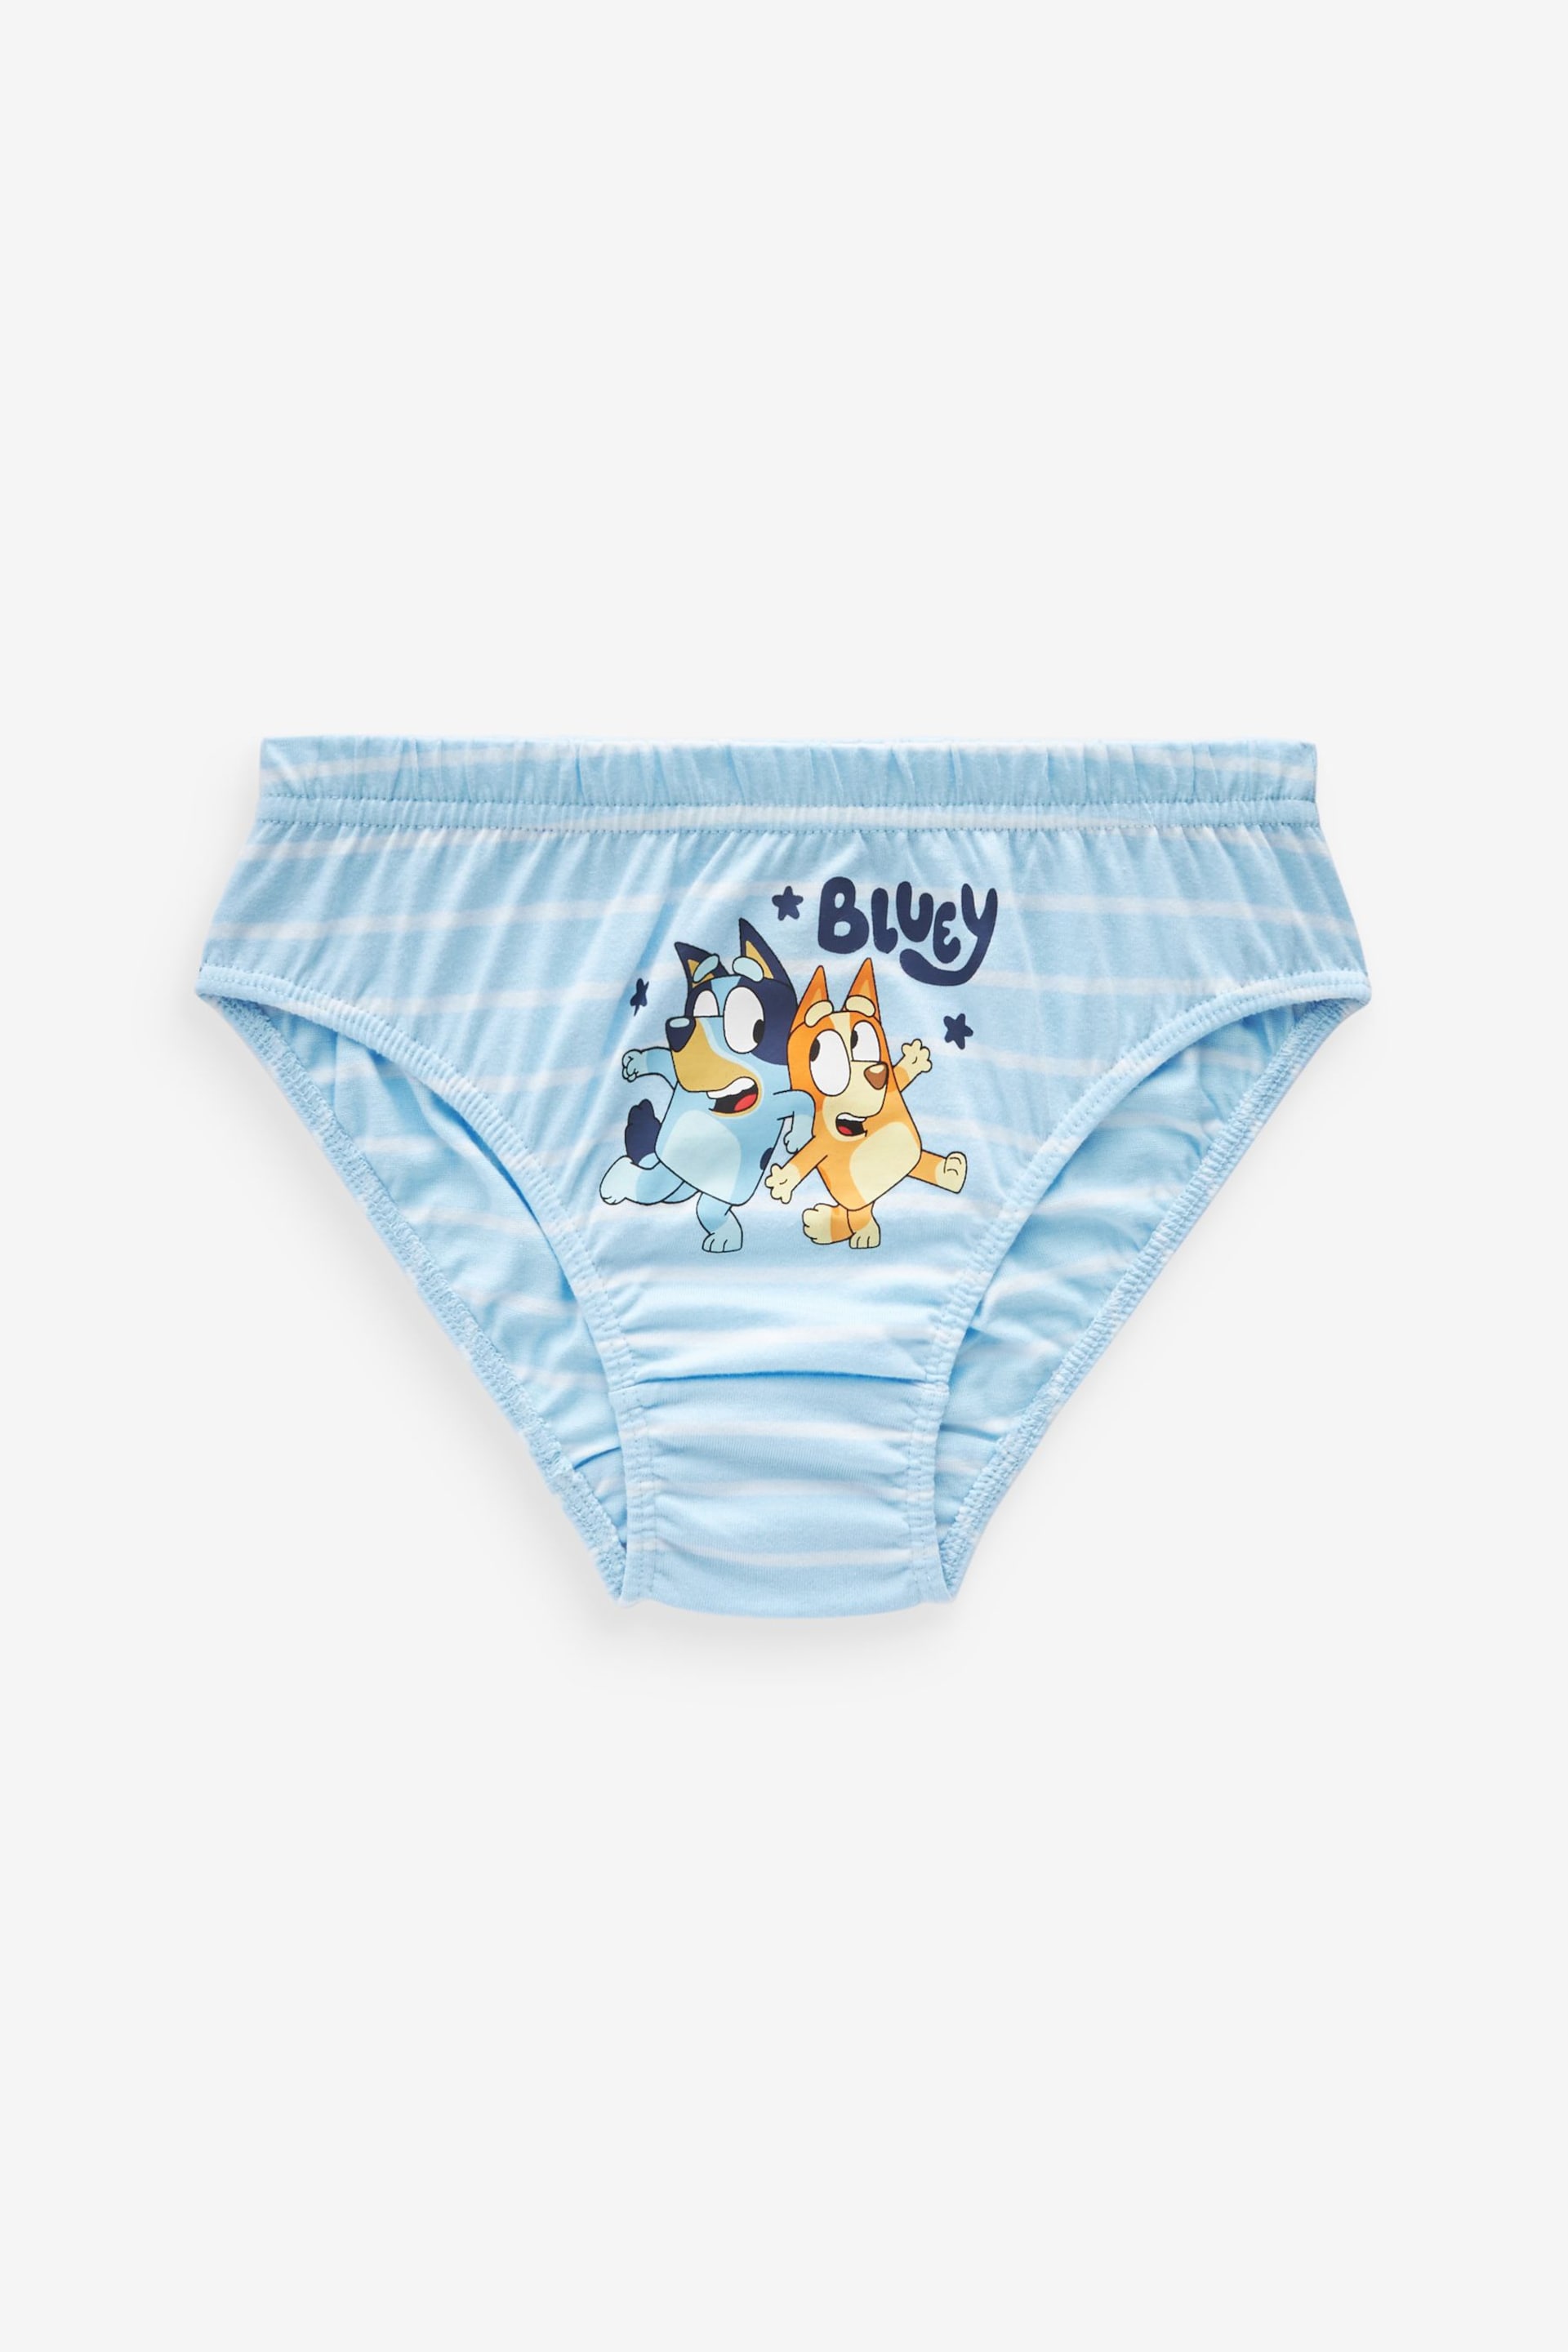 Bluey Briefs 5 Pack (1.5-10yrs) - Image 6 of 8